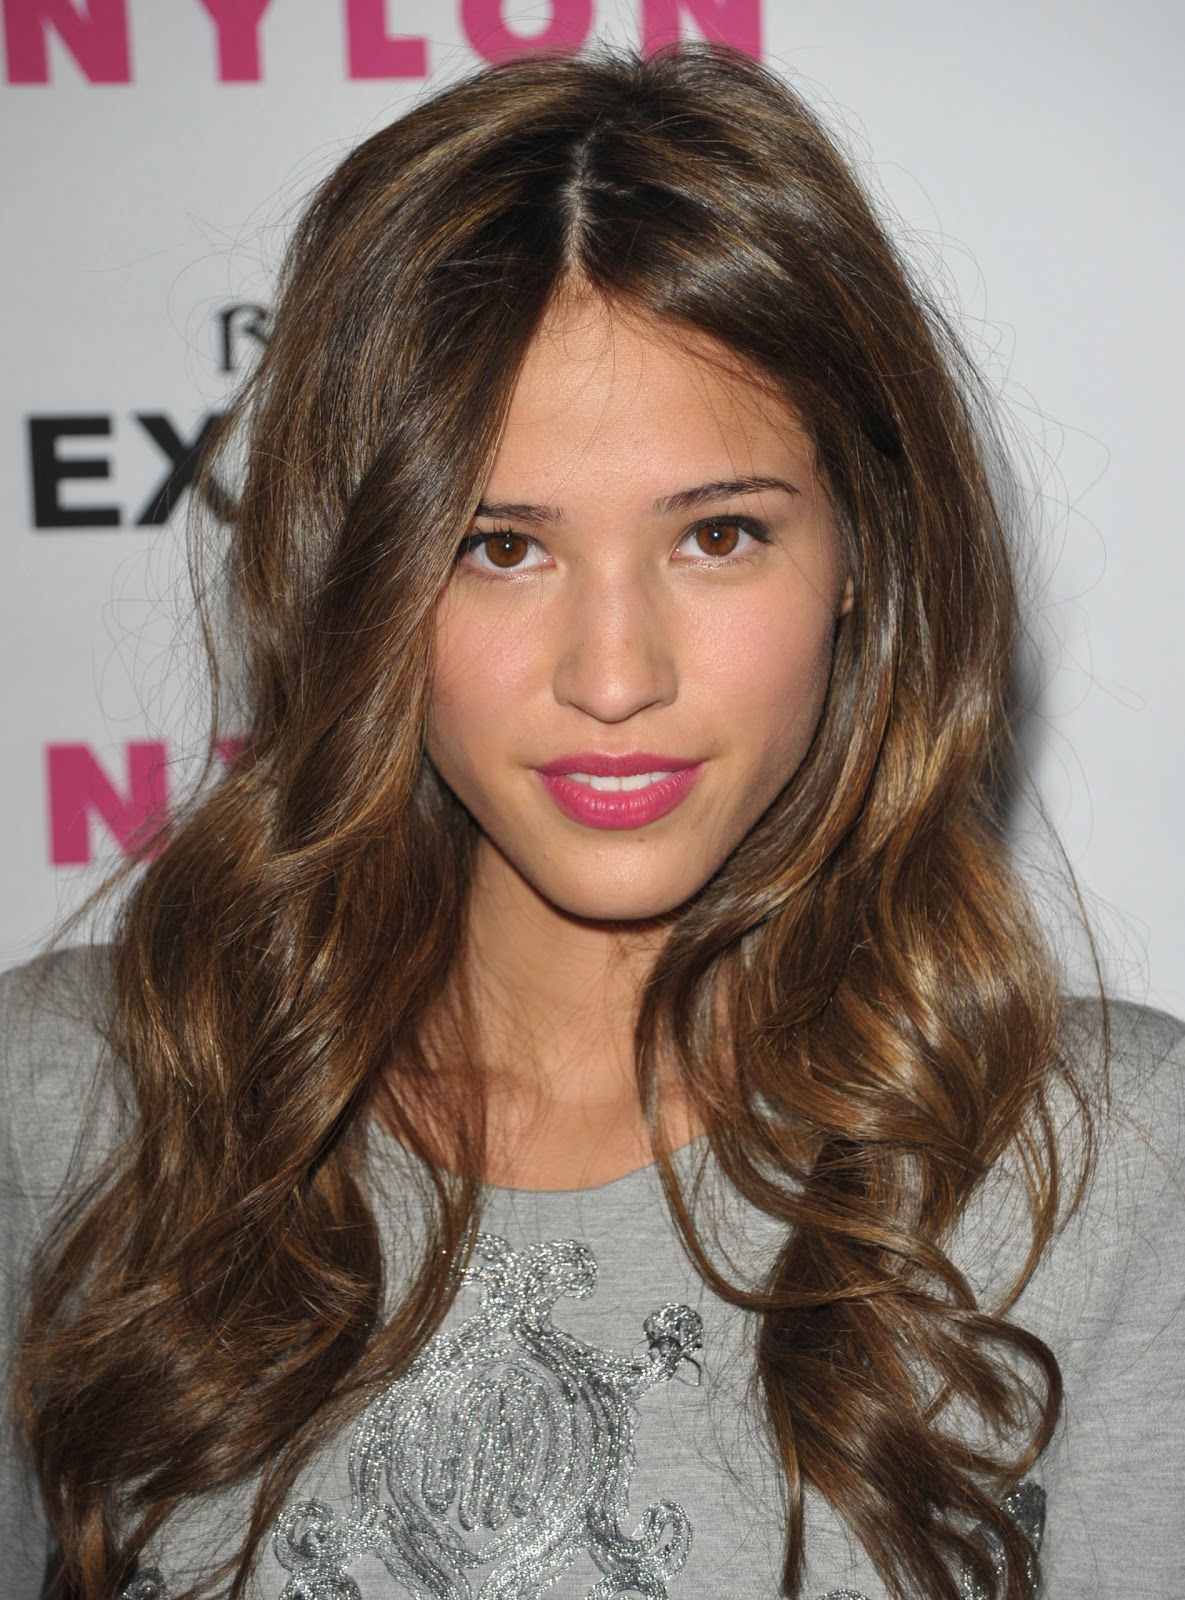 The Hottest Photos Of Kelsey Asbille.